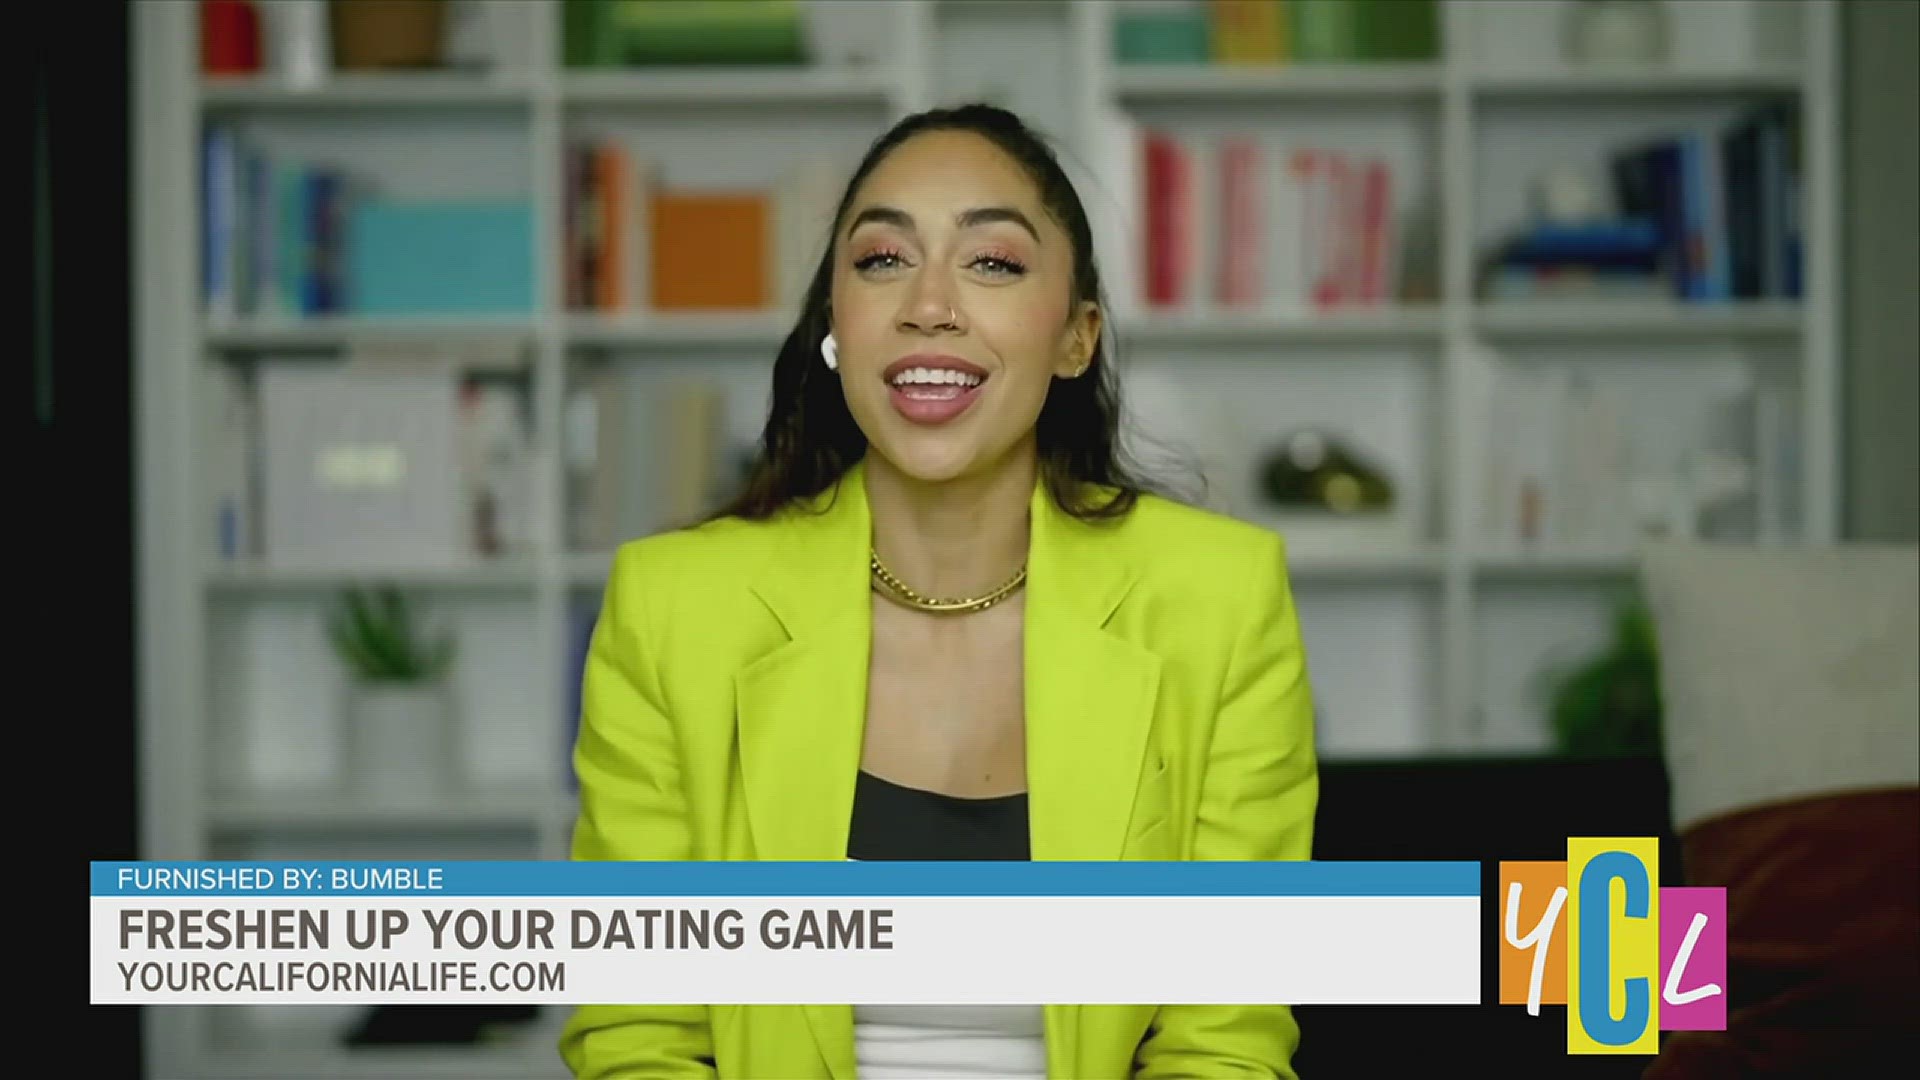 Before you start swiping on the apps, see how to freshen up your dating game this spring to find your best match.